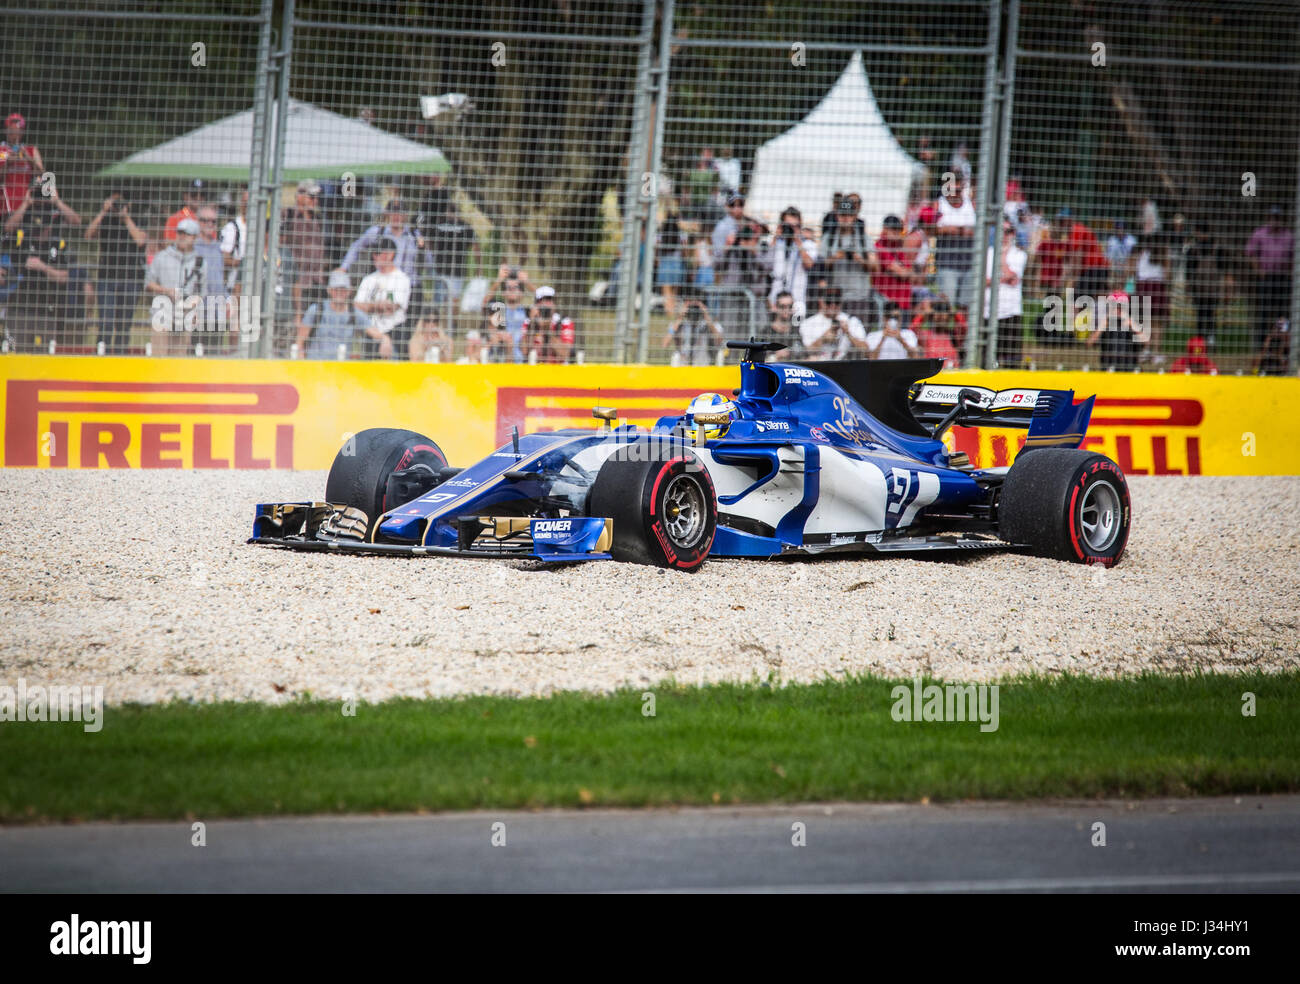 Sauber spinning off into a gravel trap at the 2017 Australian Formula One Grand Prix Stock Photo